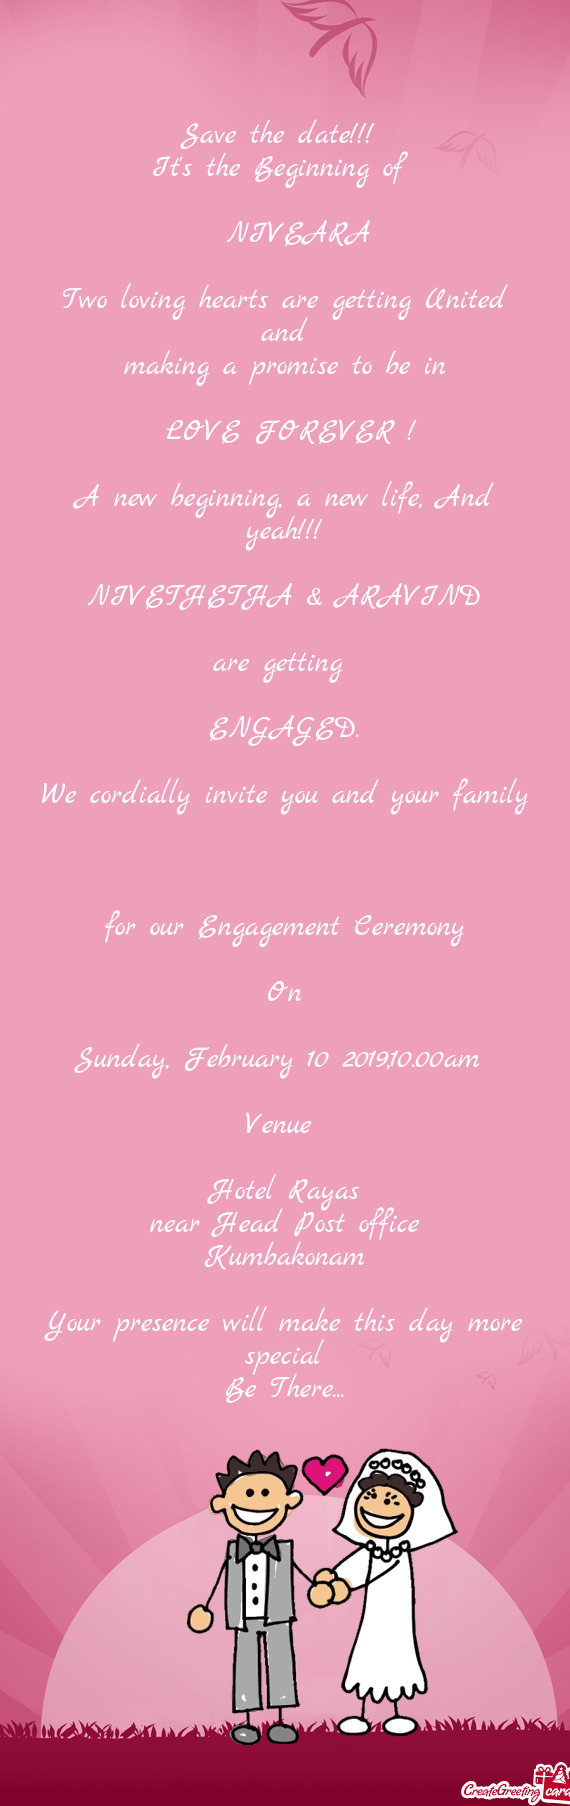 We cordially invite you and your family
 
 for our Engagement Ceremony
 
 On
 
 Sunday